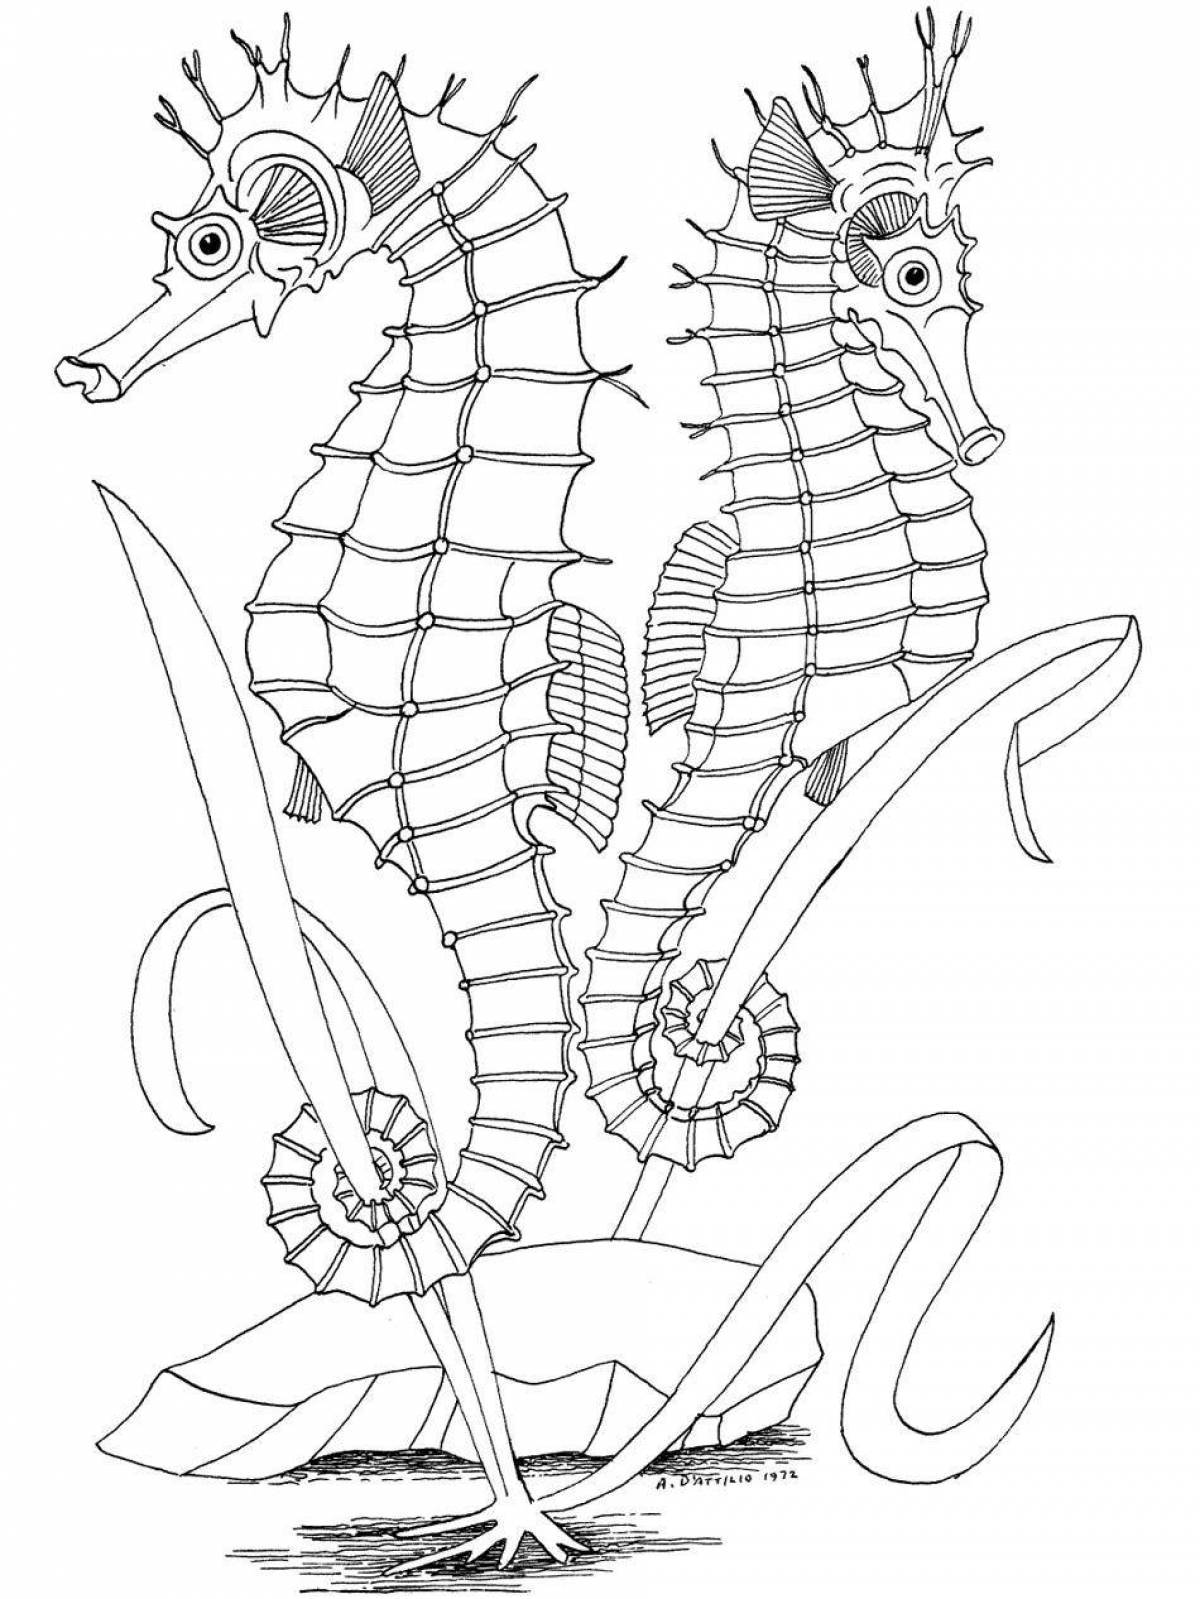 A funny seahorse coloring book for kids